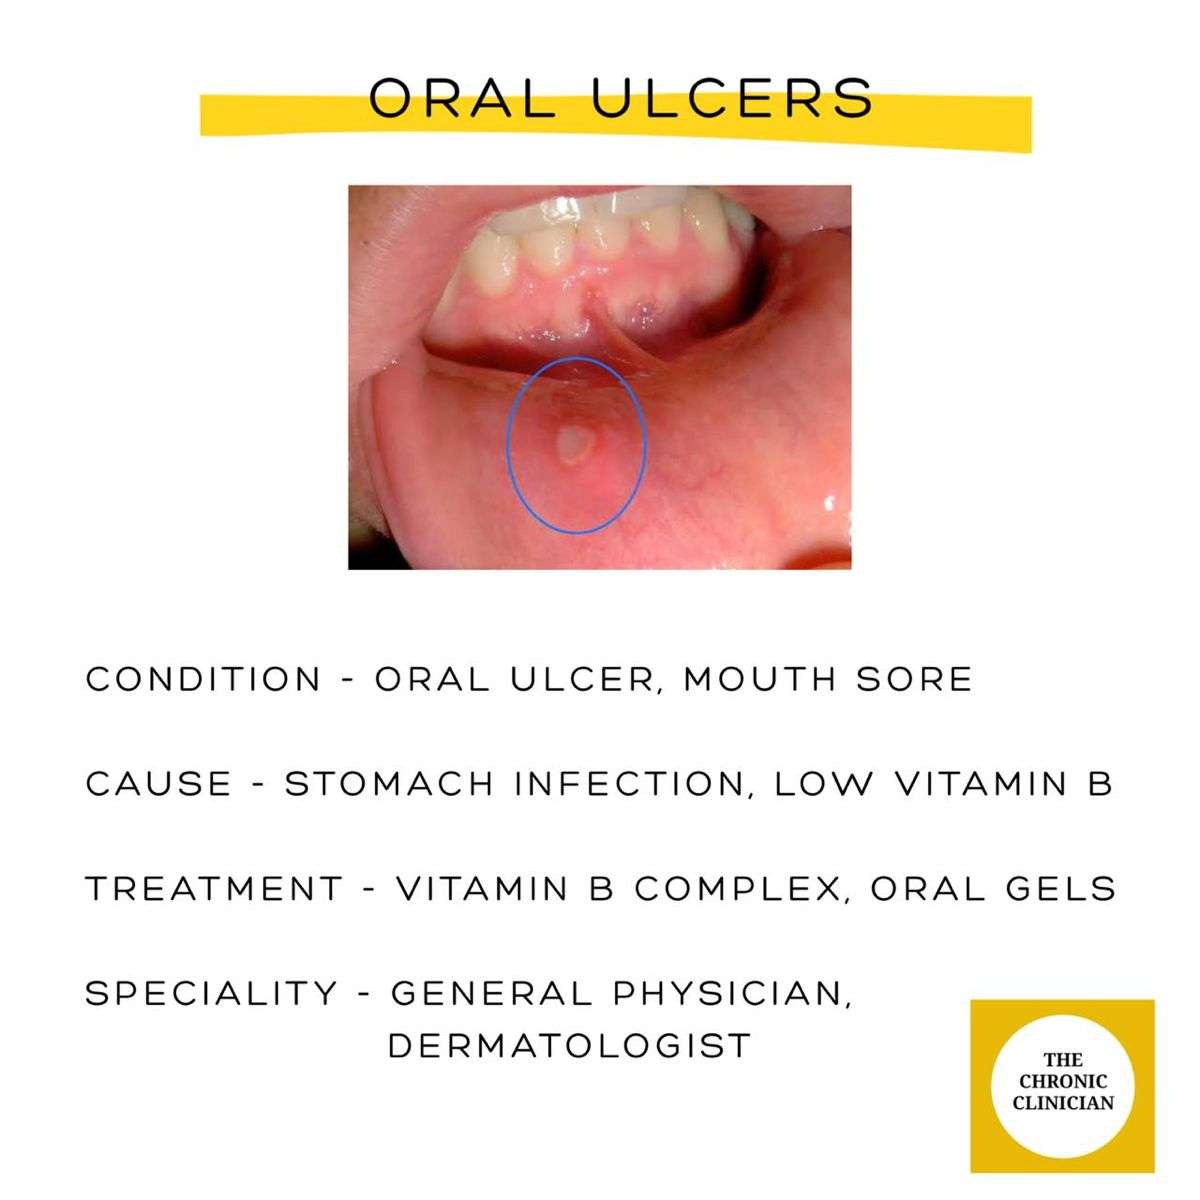 Oral ulcers